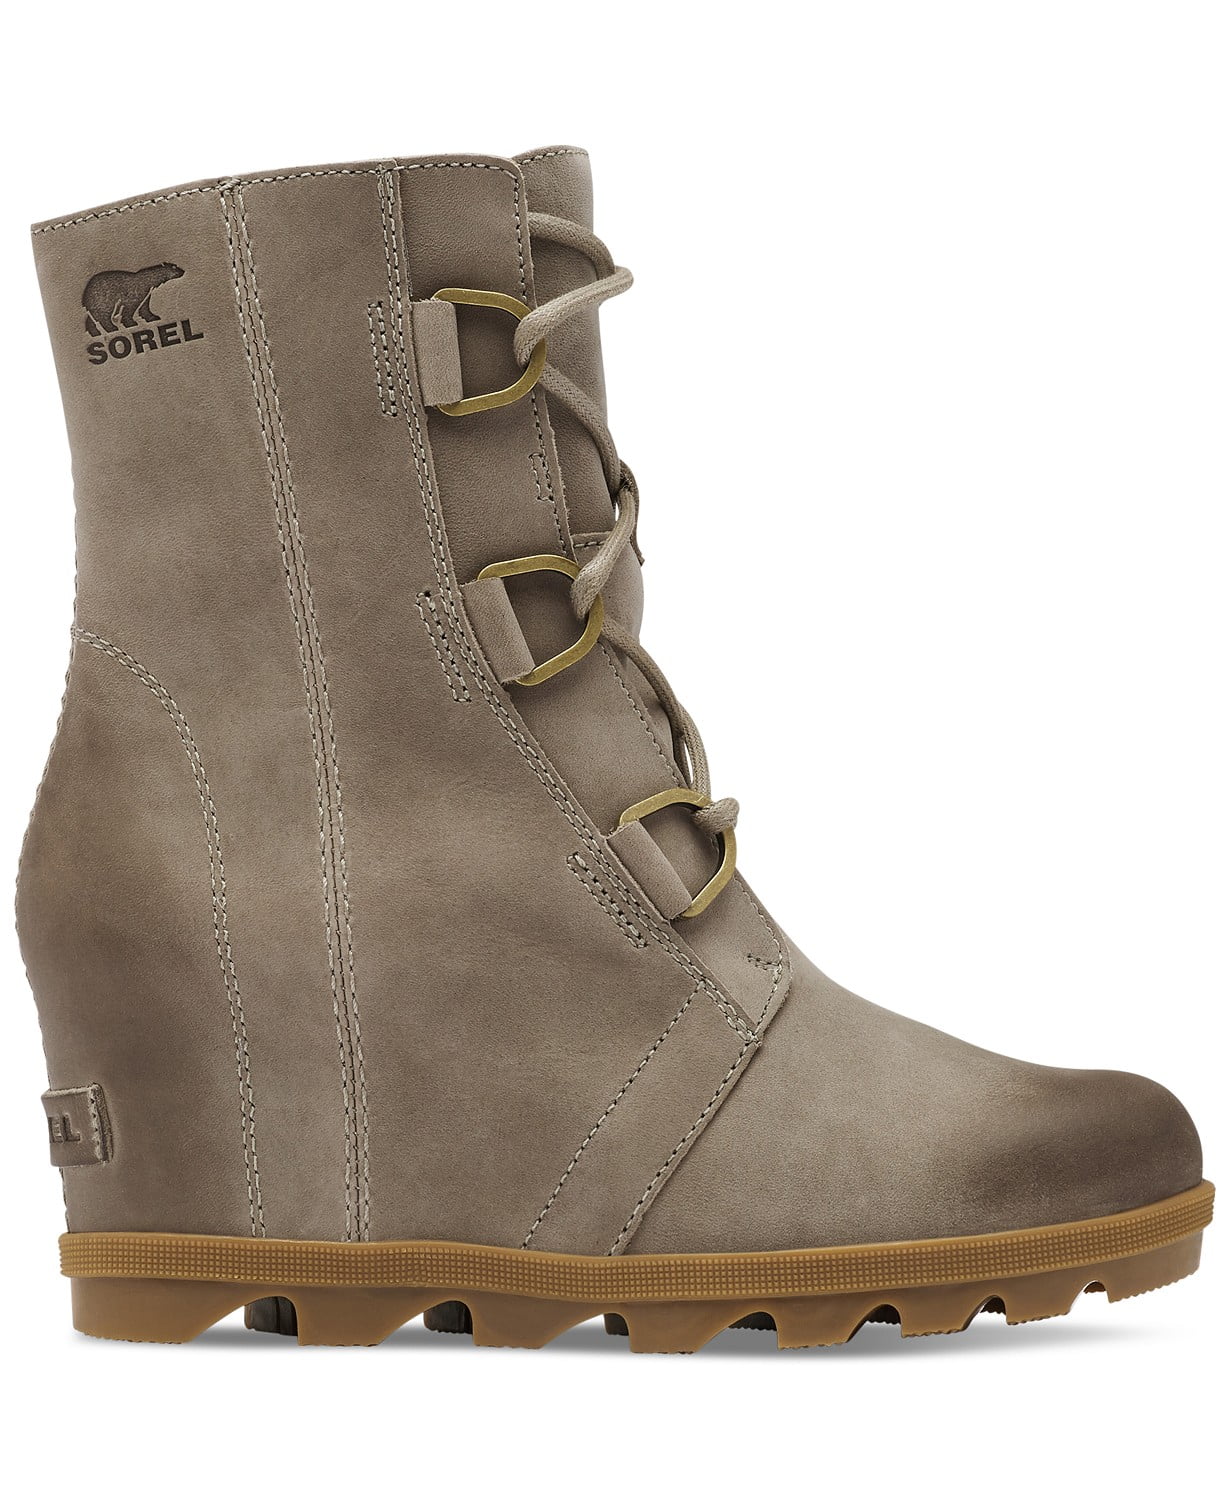 www.couturepoint.com-sorel-womens-brown-leather-joan-of-arctic-lug-sole-wedge-booties